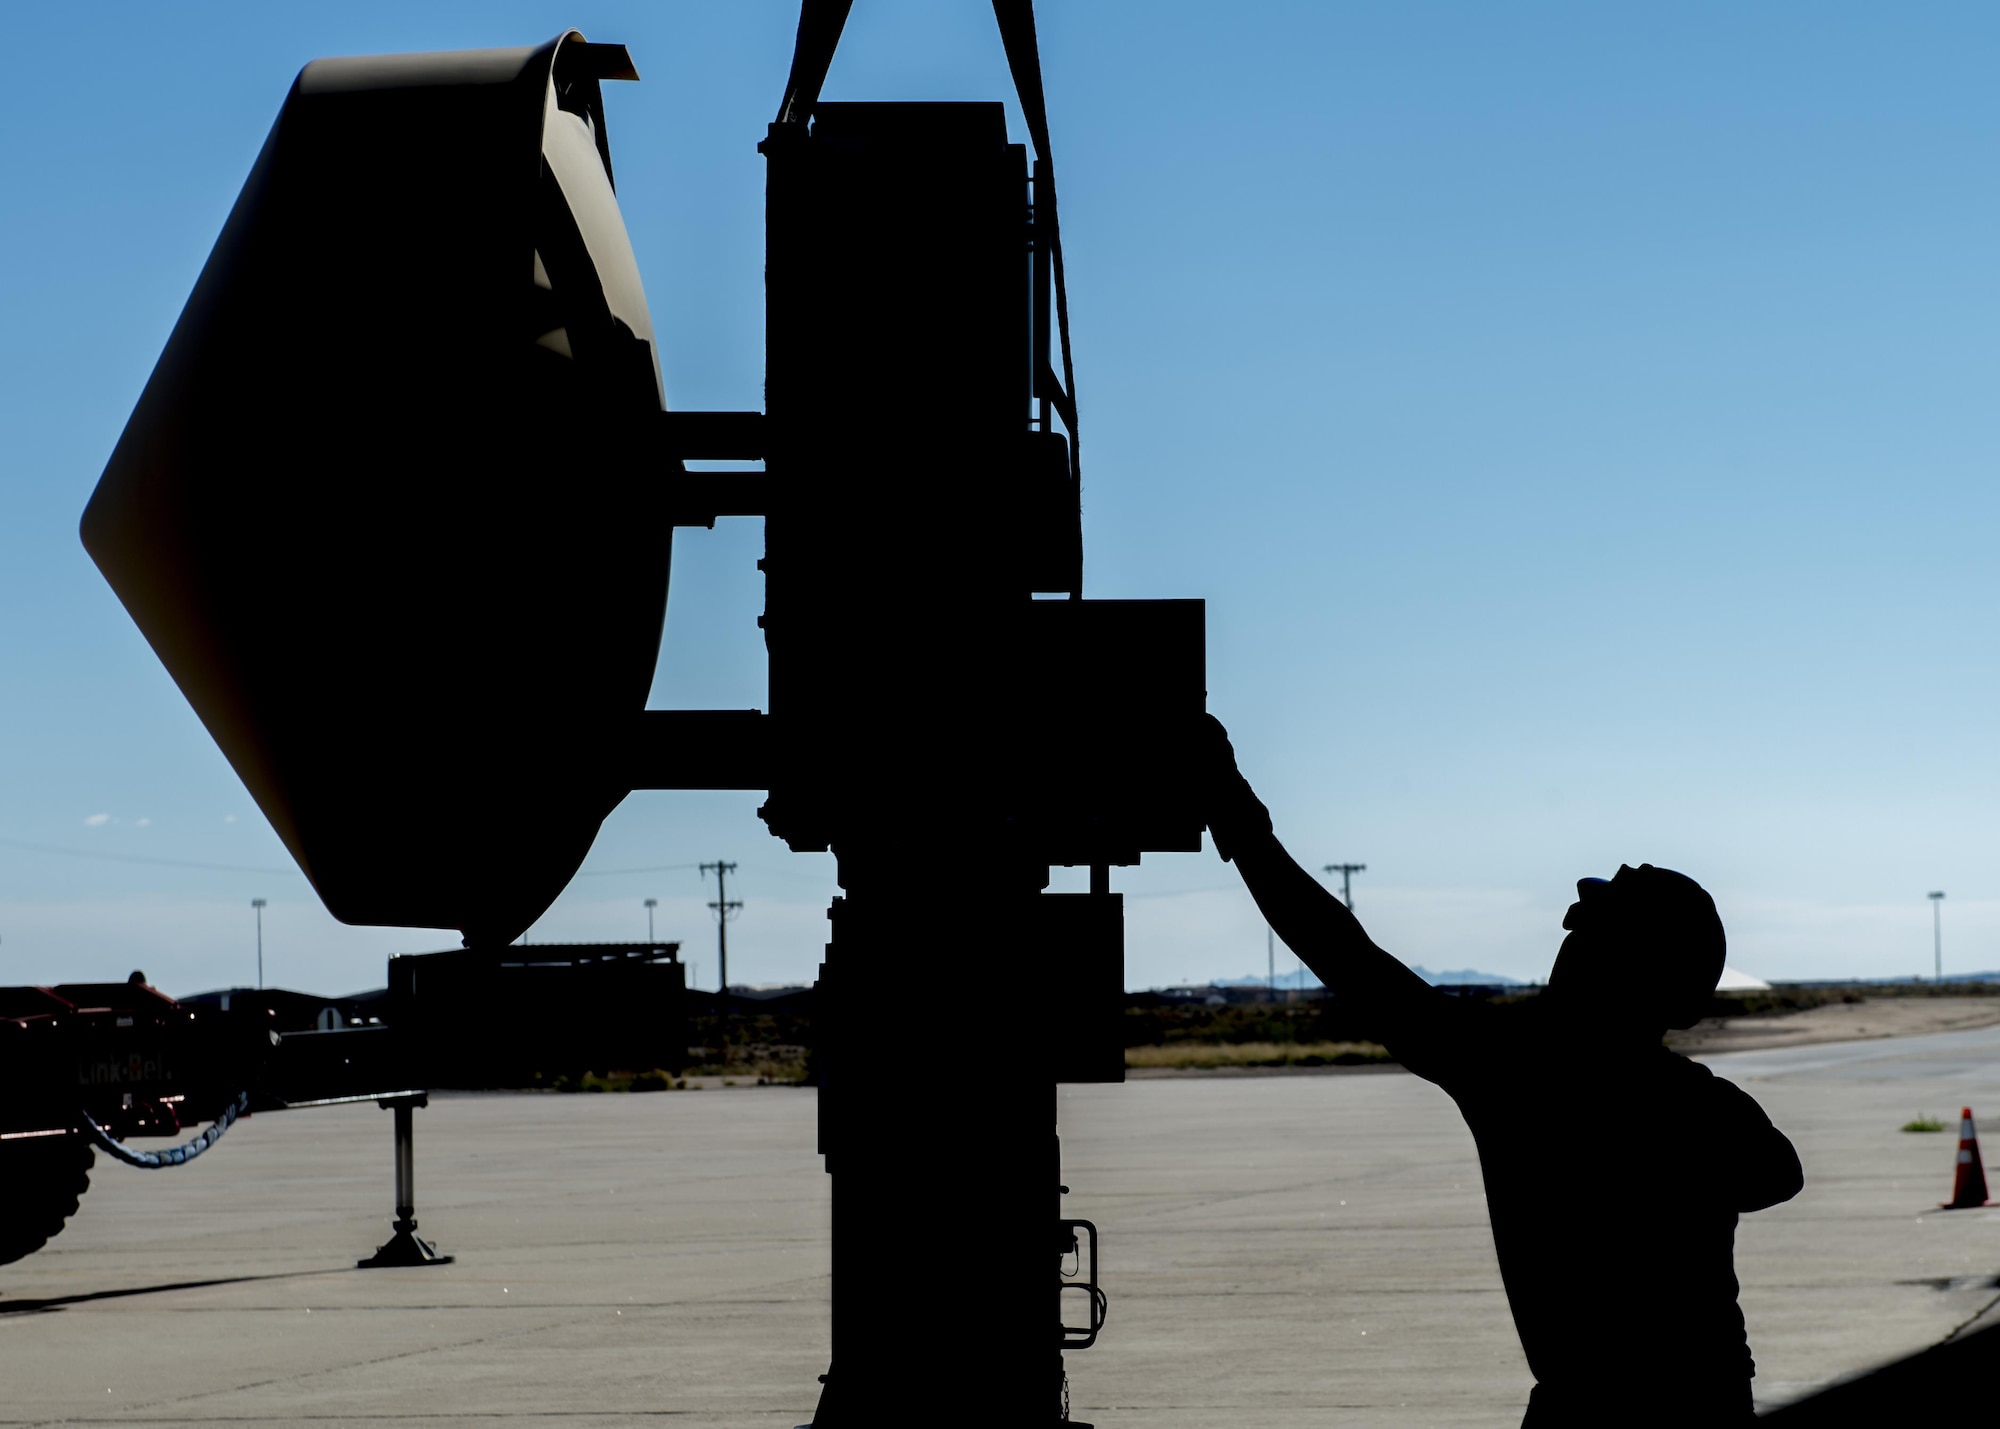 Senior Airman Jon, a 49th Aircraft Maintenance Squadron aircraft communications maintenance technician, balances and guides a Ground Data Terminal antenna into position before installation at Holloman Air Force Base, N.M., on Nov. 8, 2016. The GDT is an 800-pound antenna that facilitates communication between Remotely Piloted Aircraft and their crews on the ground in the Ground Control Station. (U.S. Air Force photo by Senior Airman Emily Kenney)